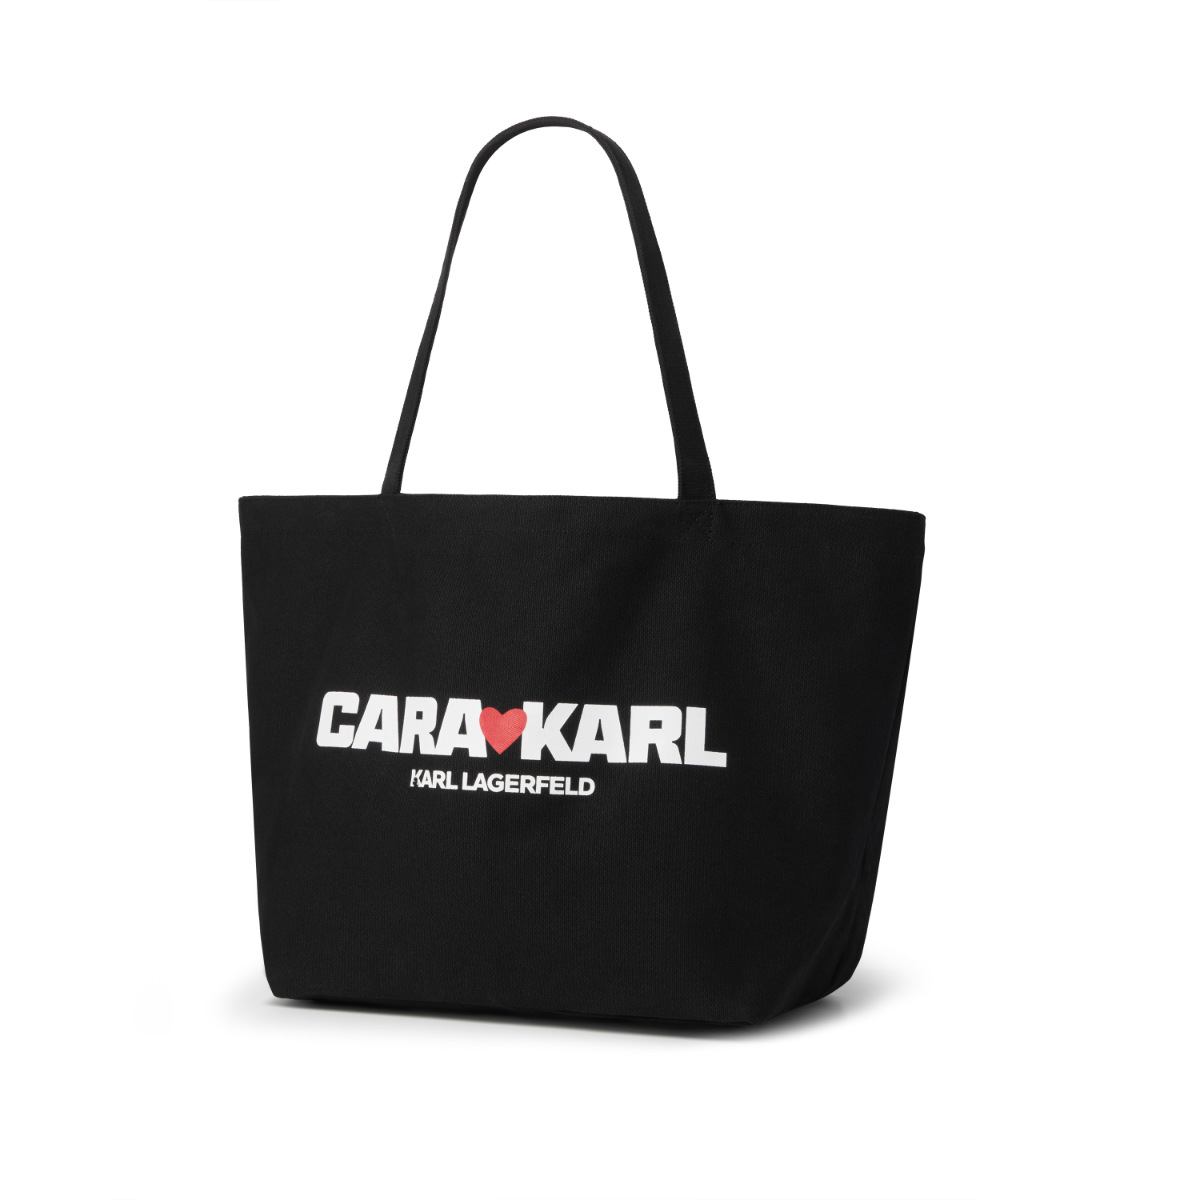 Karl Lagerfeld Presents Its New CARA LOVES KARL Collection